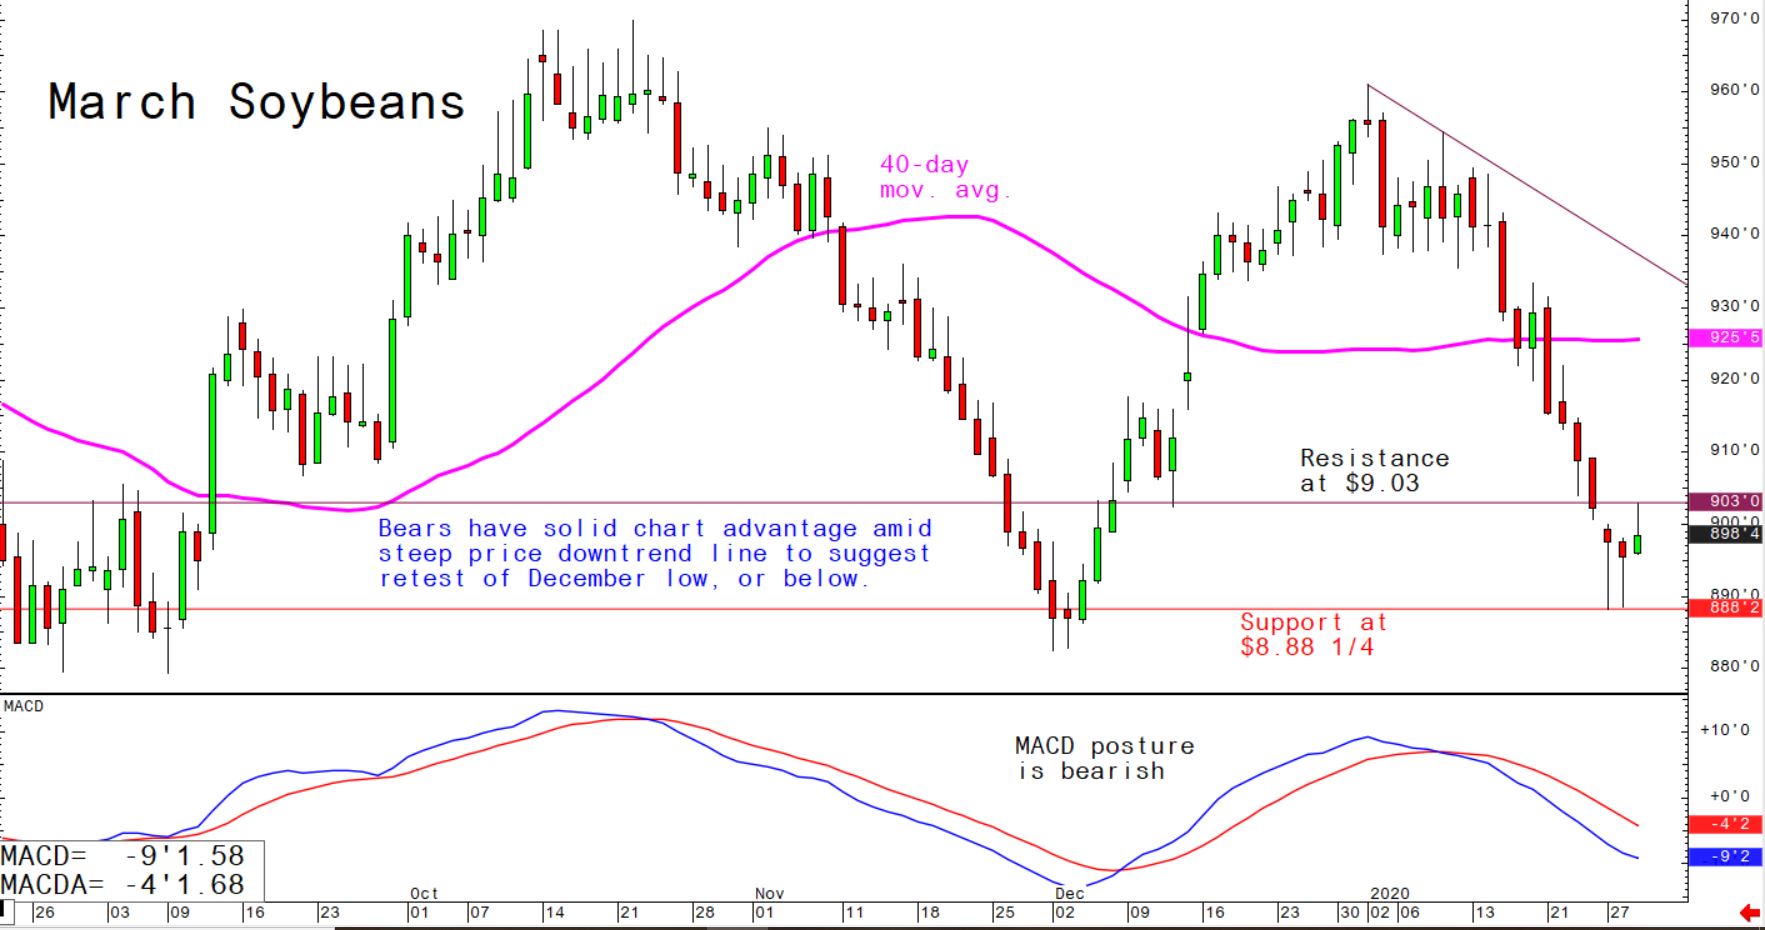 Bears have solid chart advantage amid steep price downtrend line to suggest retest of December low, or below